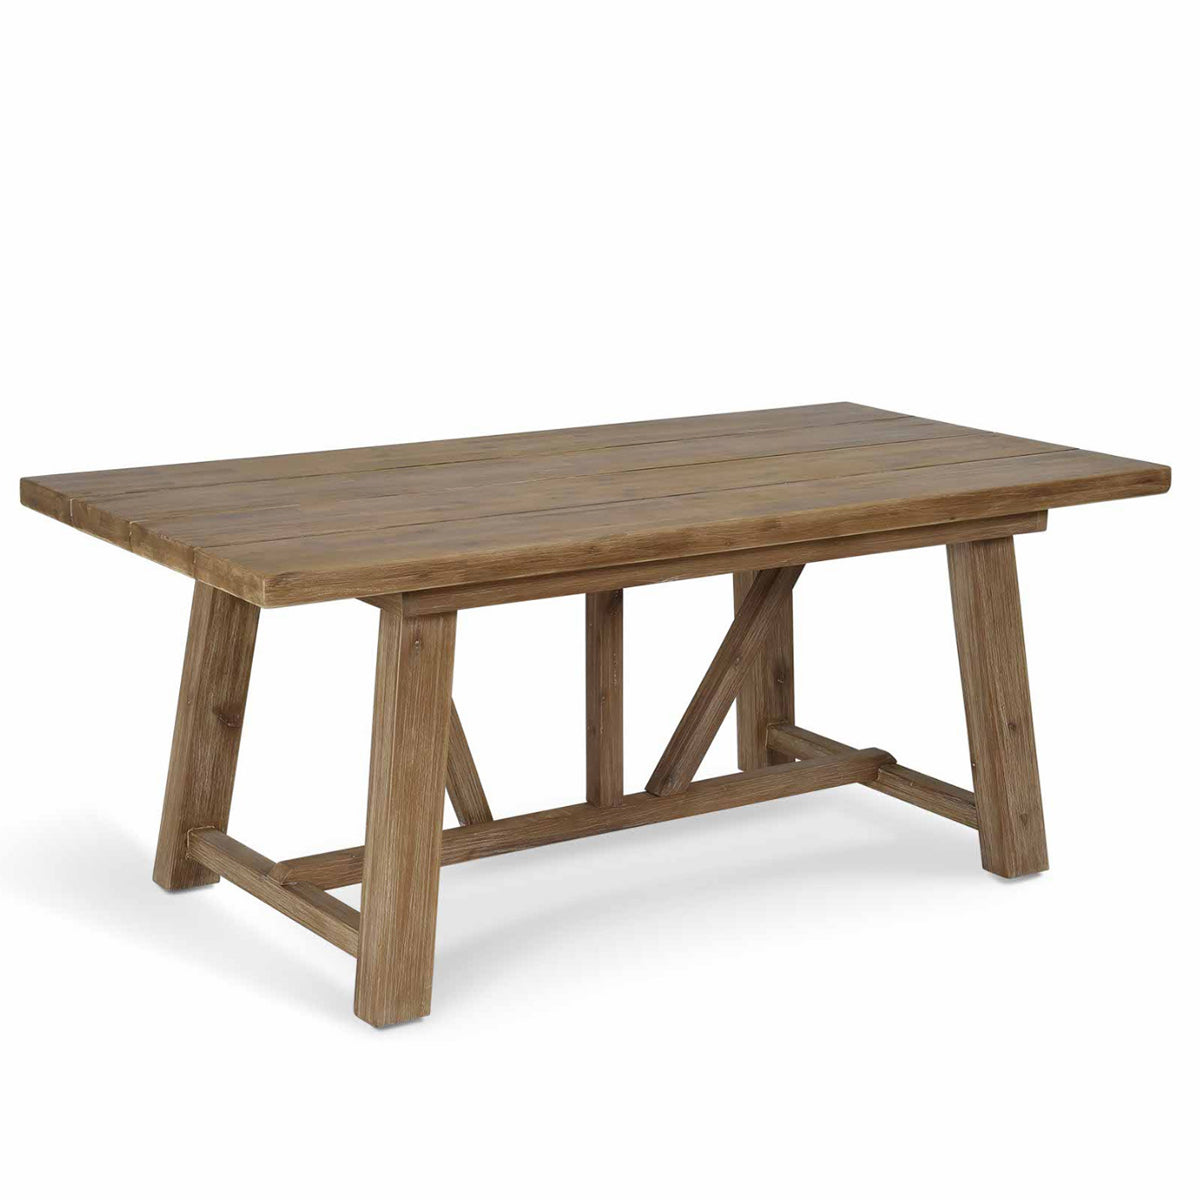 Garden Trading Chilford Solid Wood Dining Table - Large